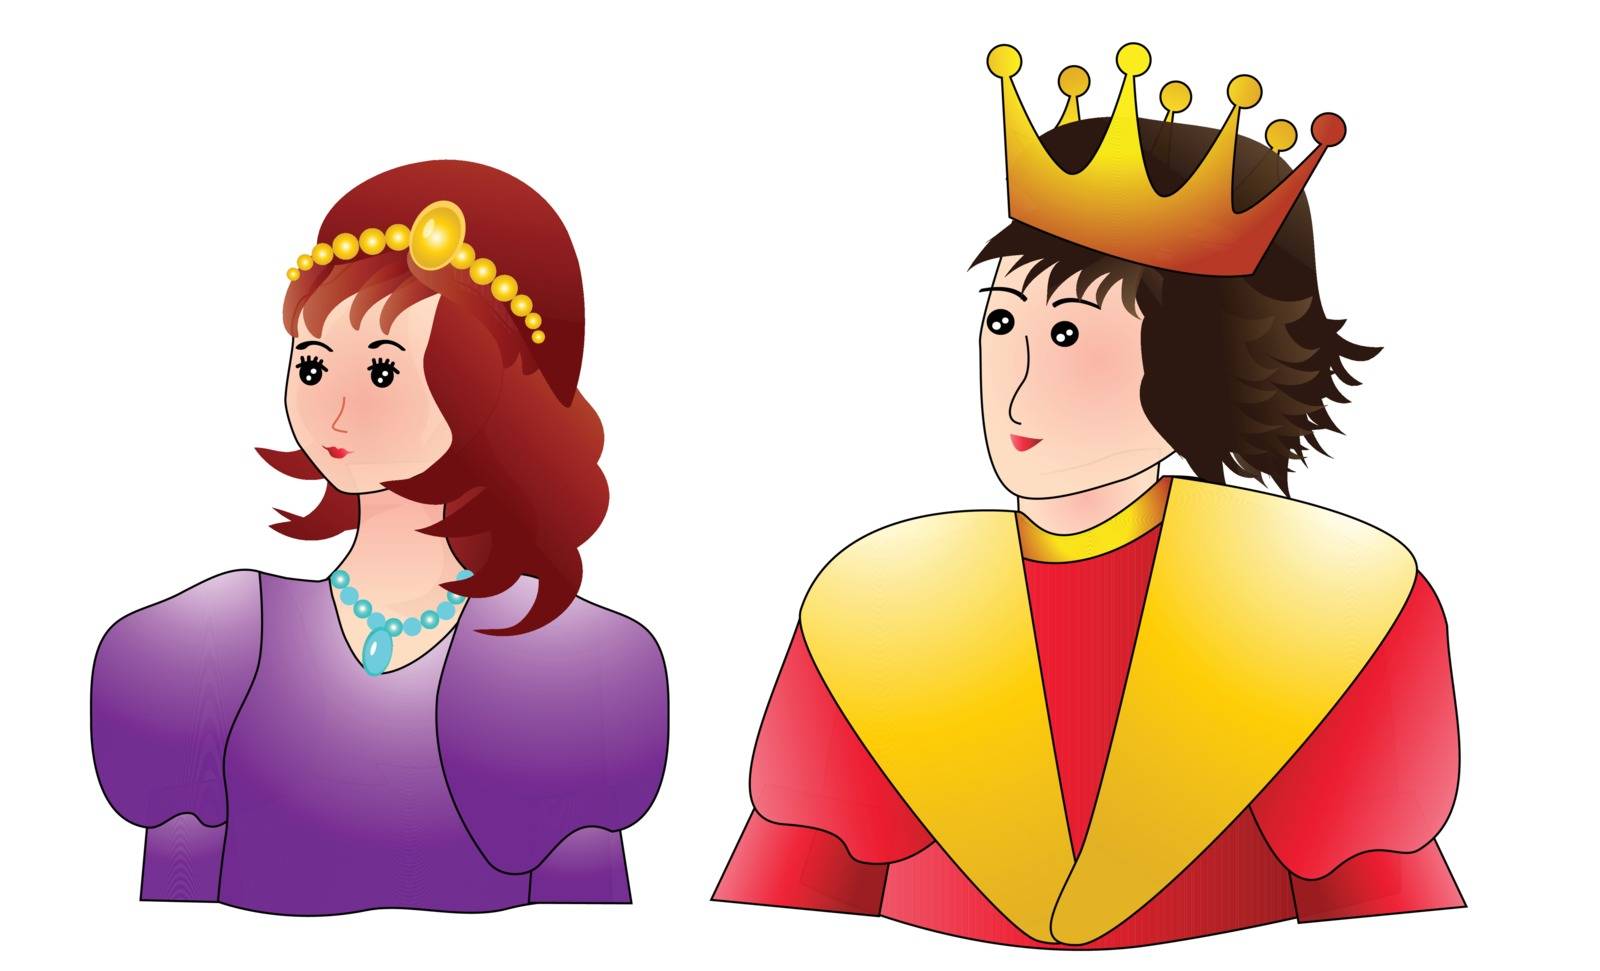 Handsome prince and pretty princess - vector illustration